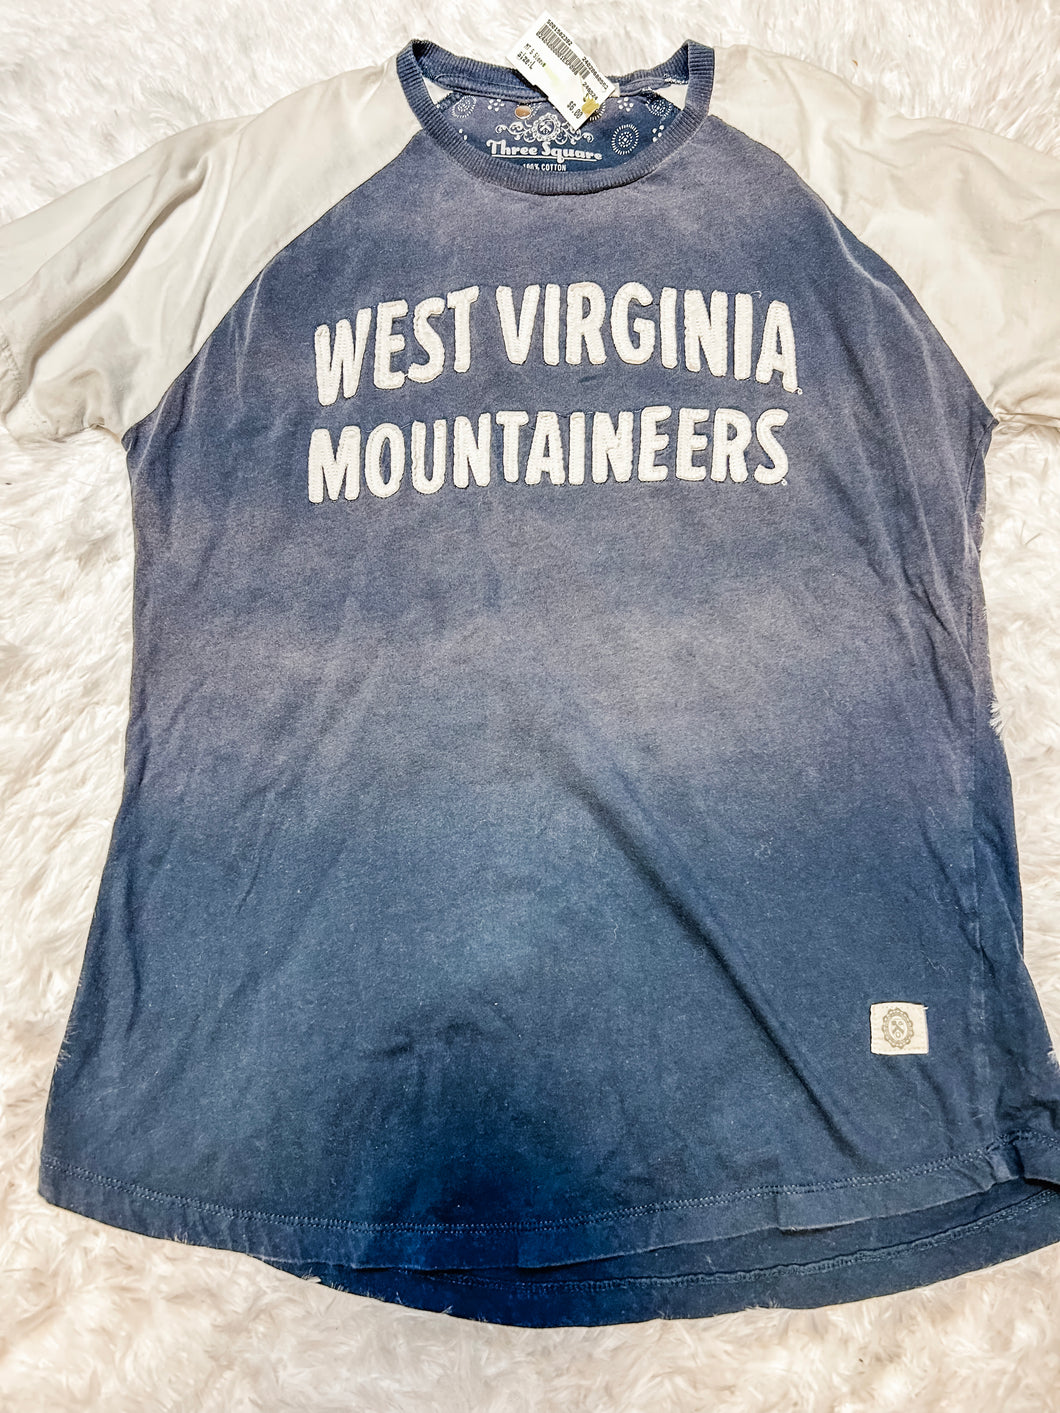 WVU Long Sleeve Top Size Small M0545